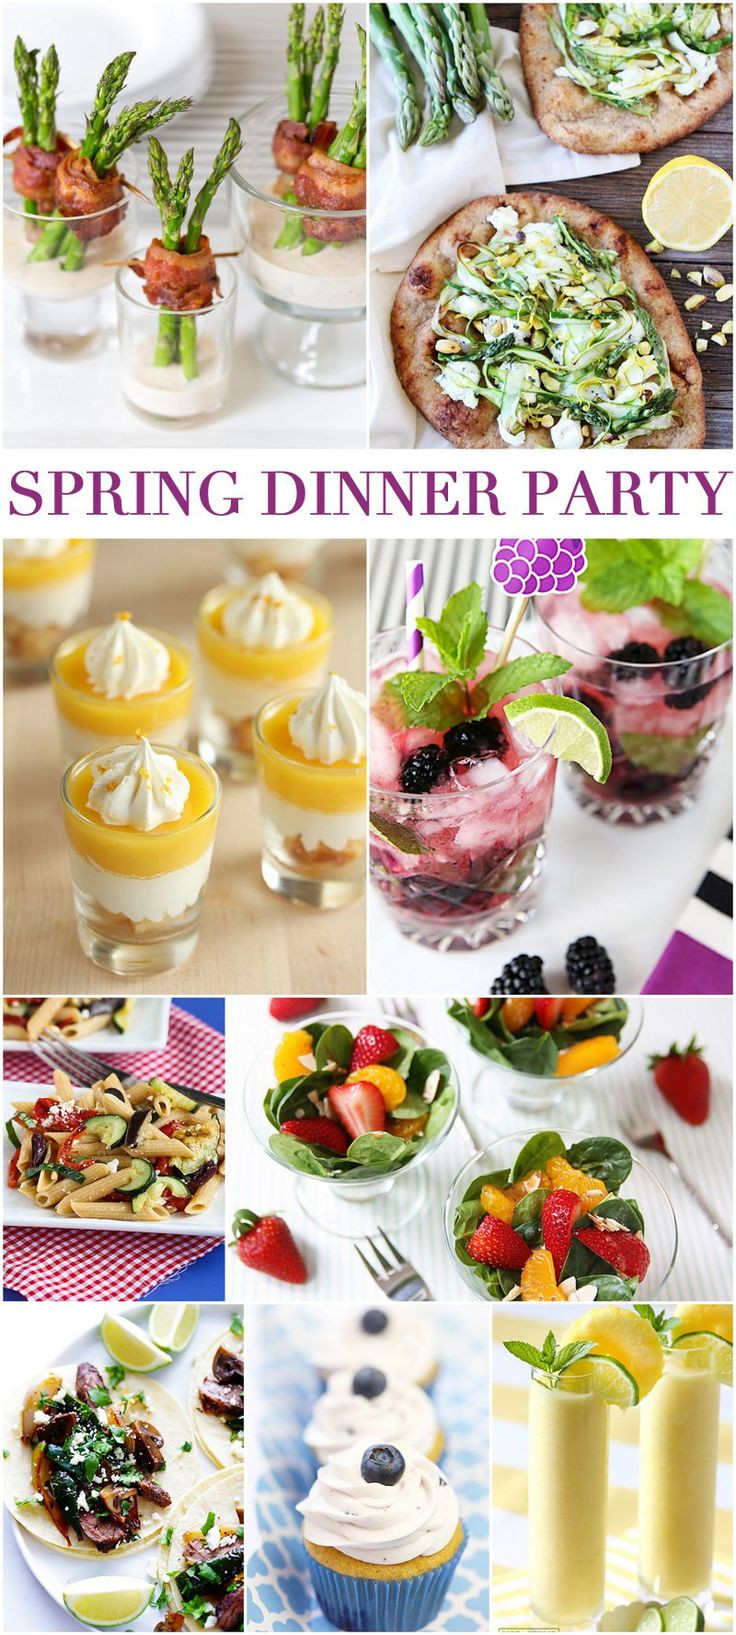 Dinner Party Food Ideas Pinterest
 Host a Spring Dinner Party in Style